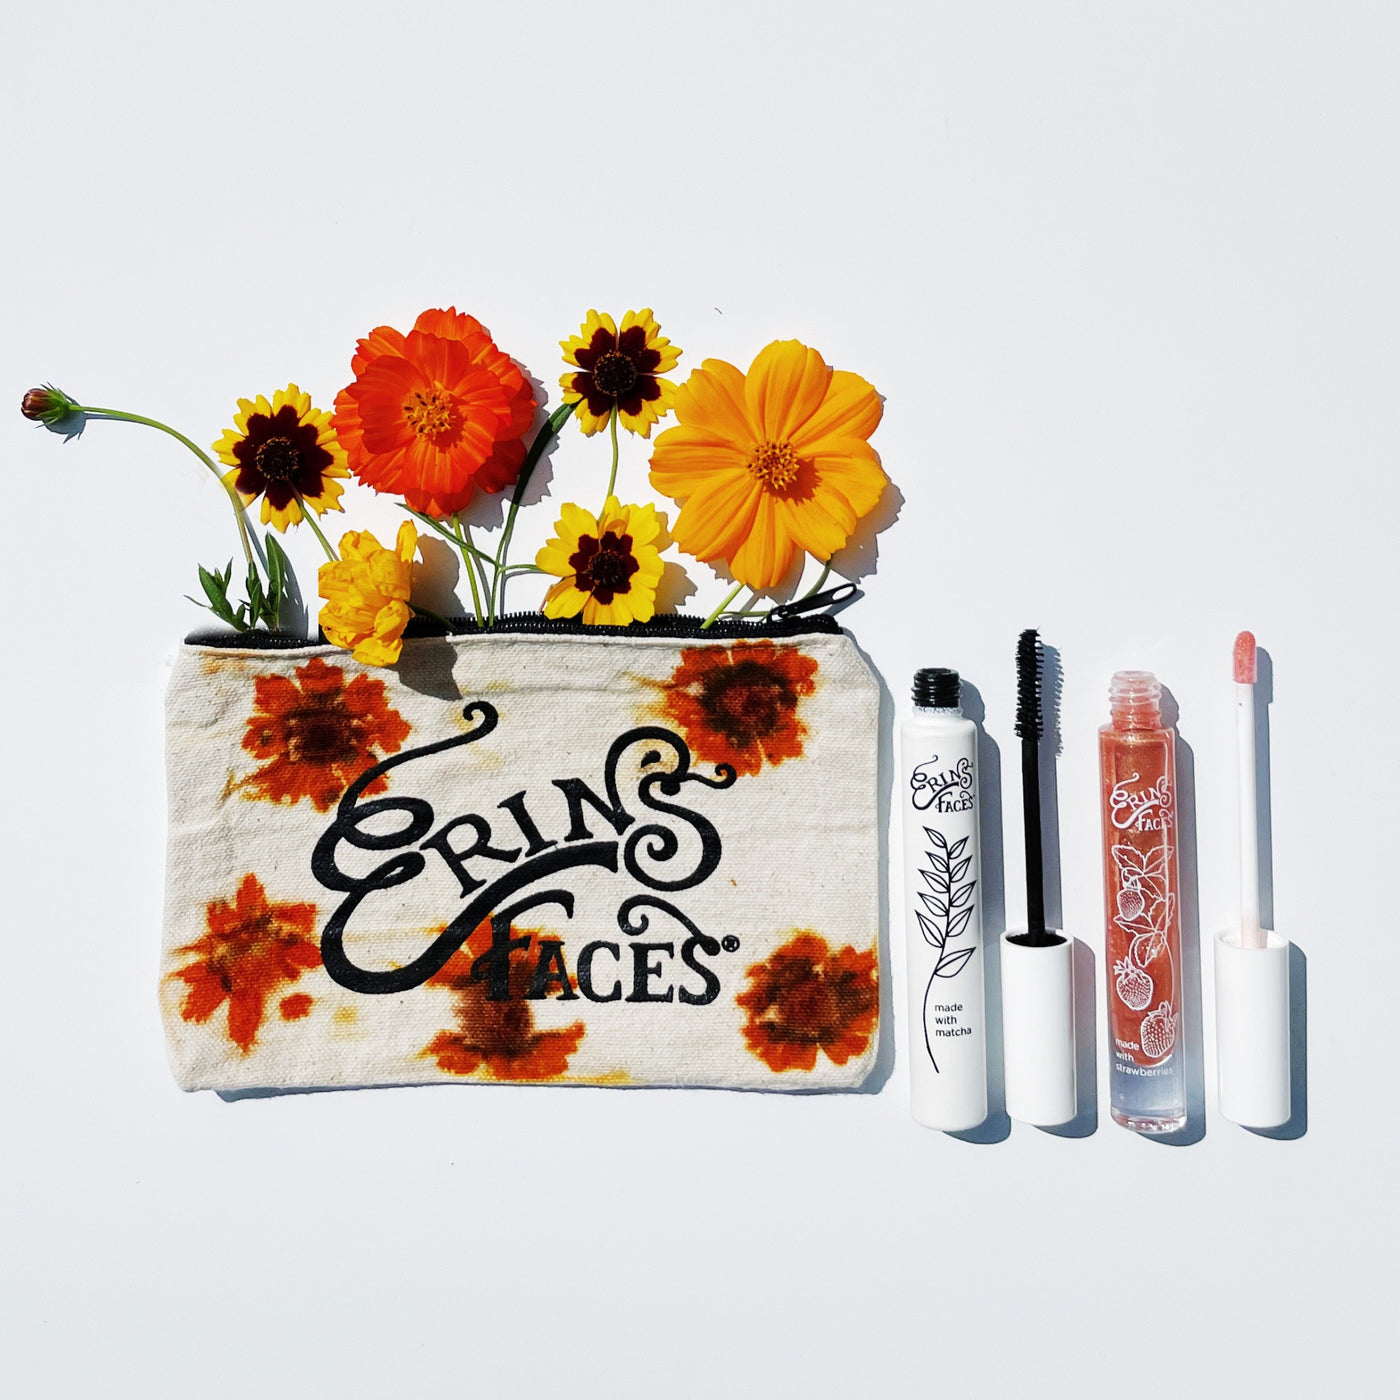 mascara and lip gloss with erin's faces logo bag dyed with yellow flowers with flowers coming out of bag